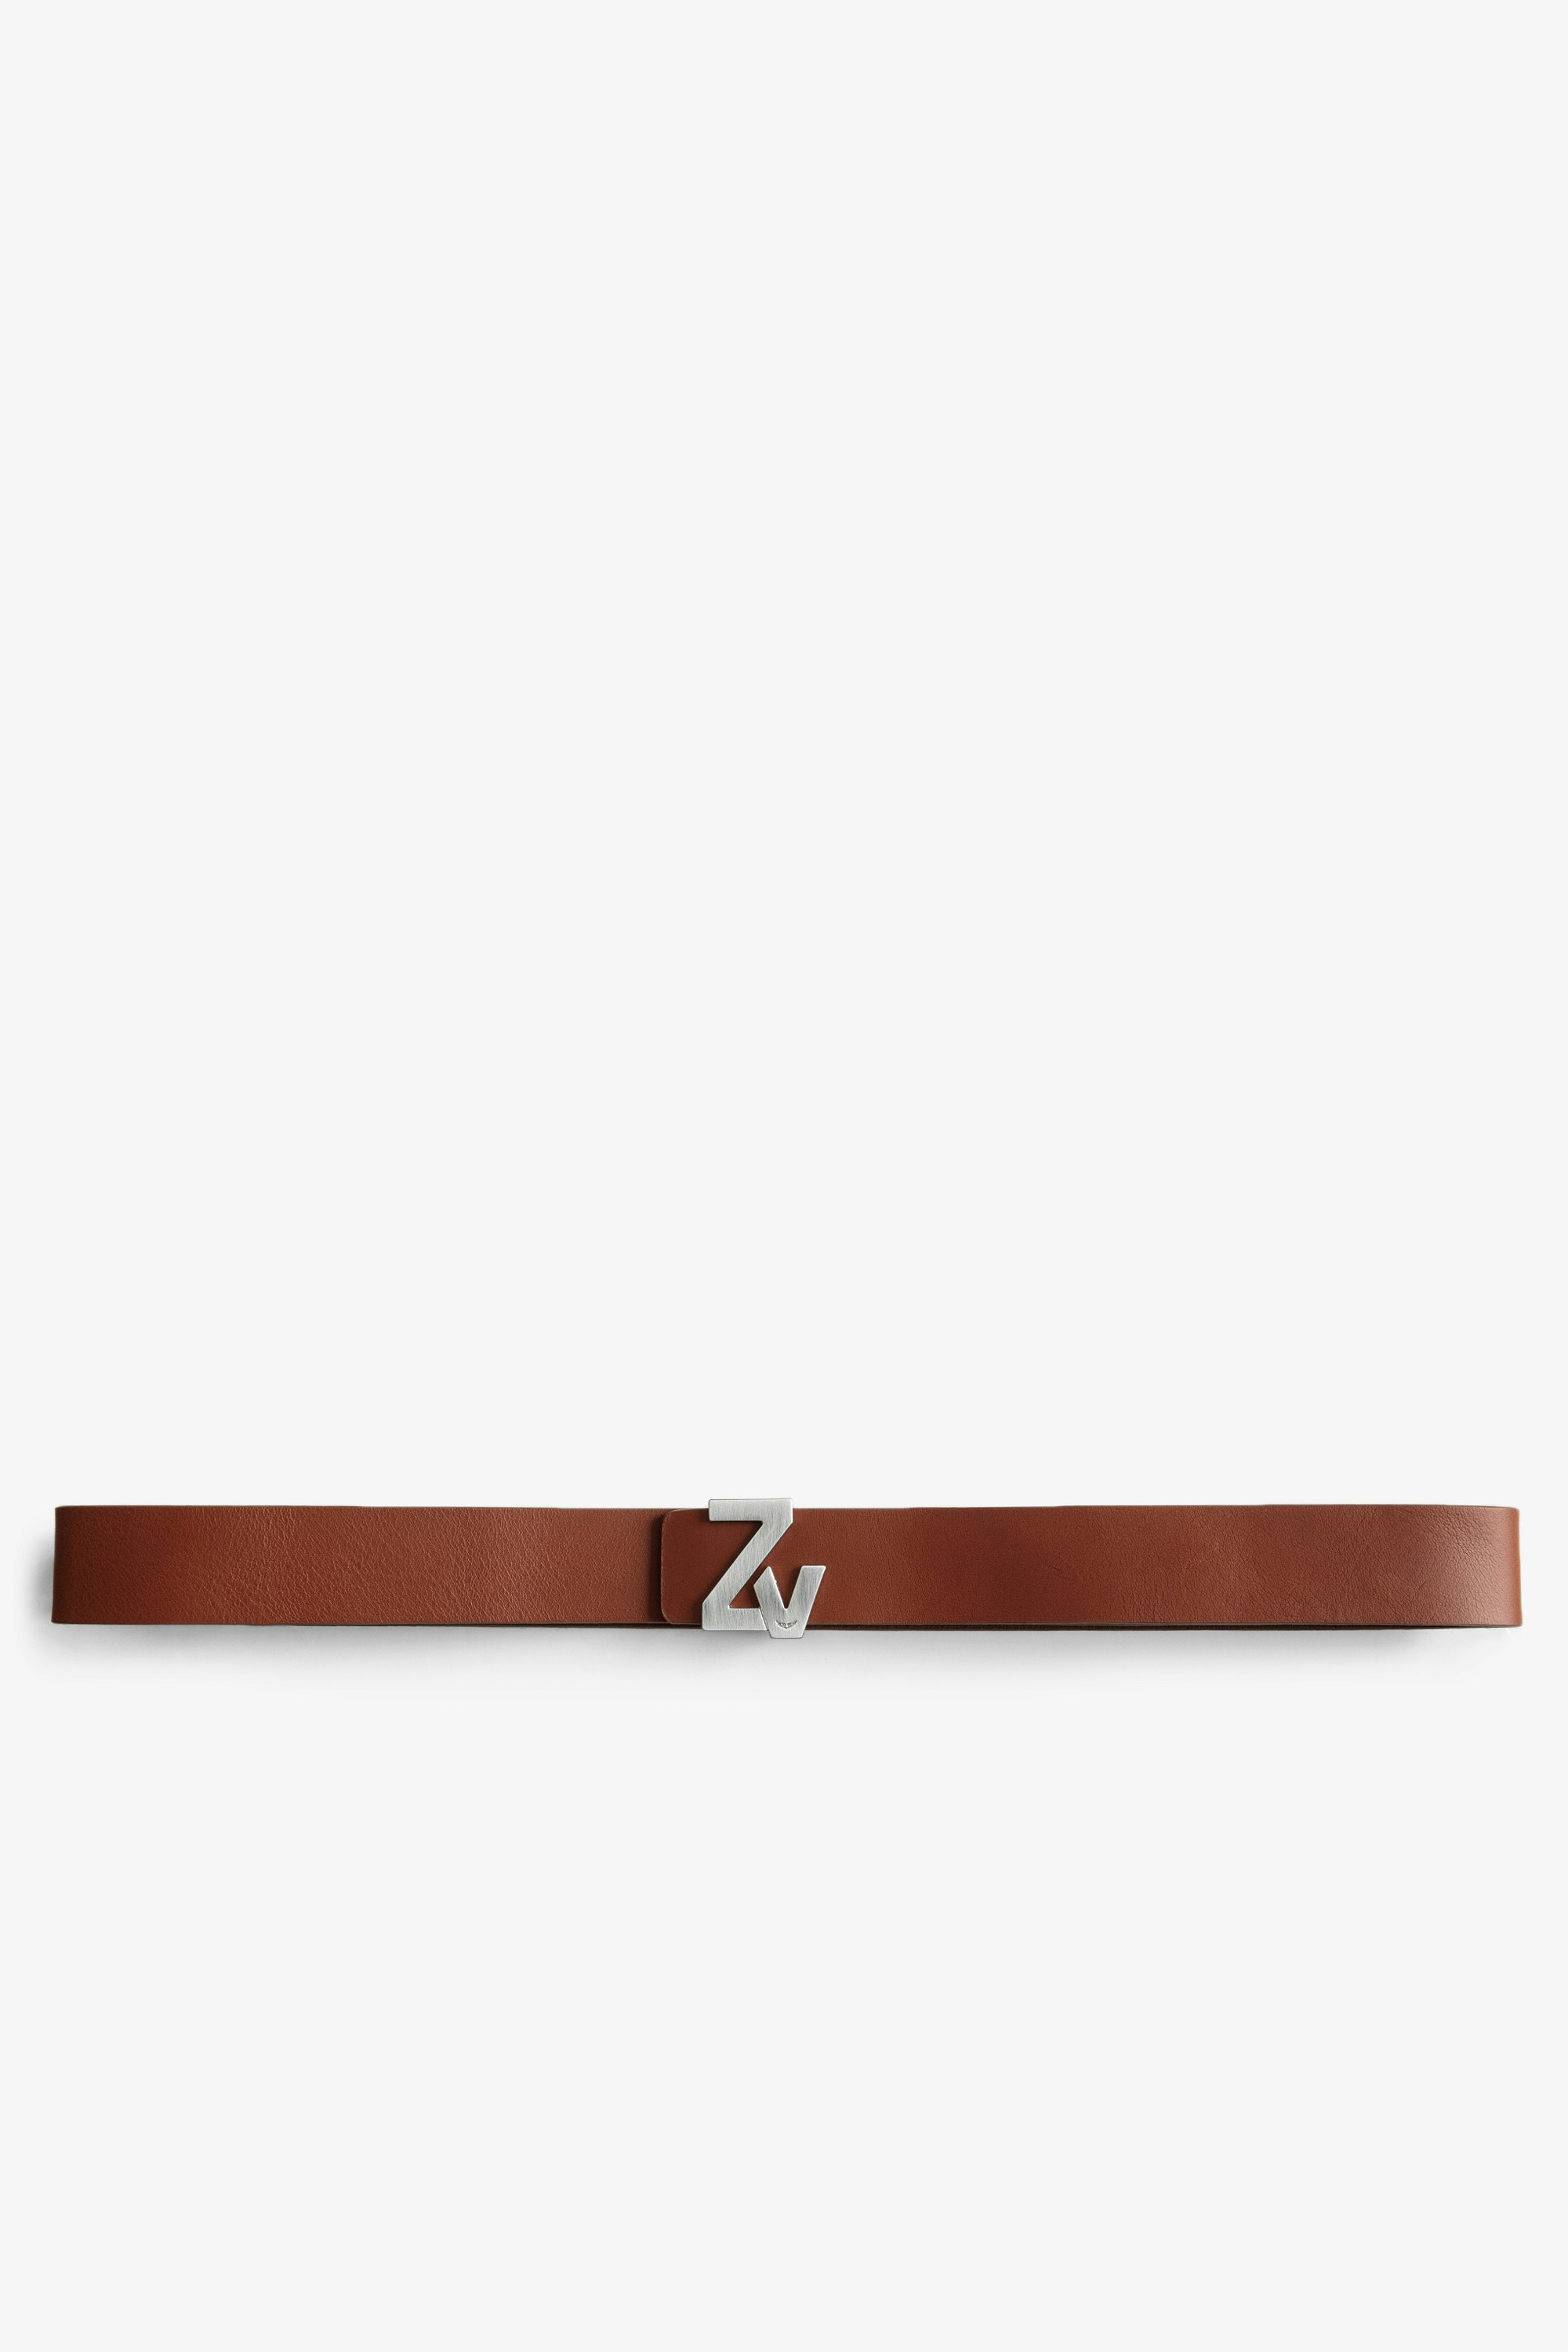 ZV Initiale La ベルト Women's camel-colored leather belt with gold ZV buckle